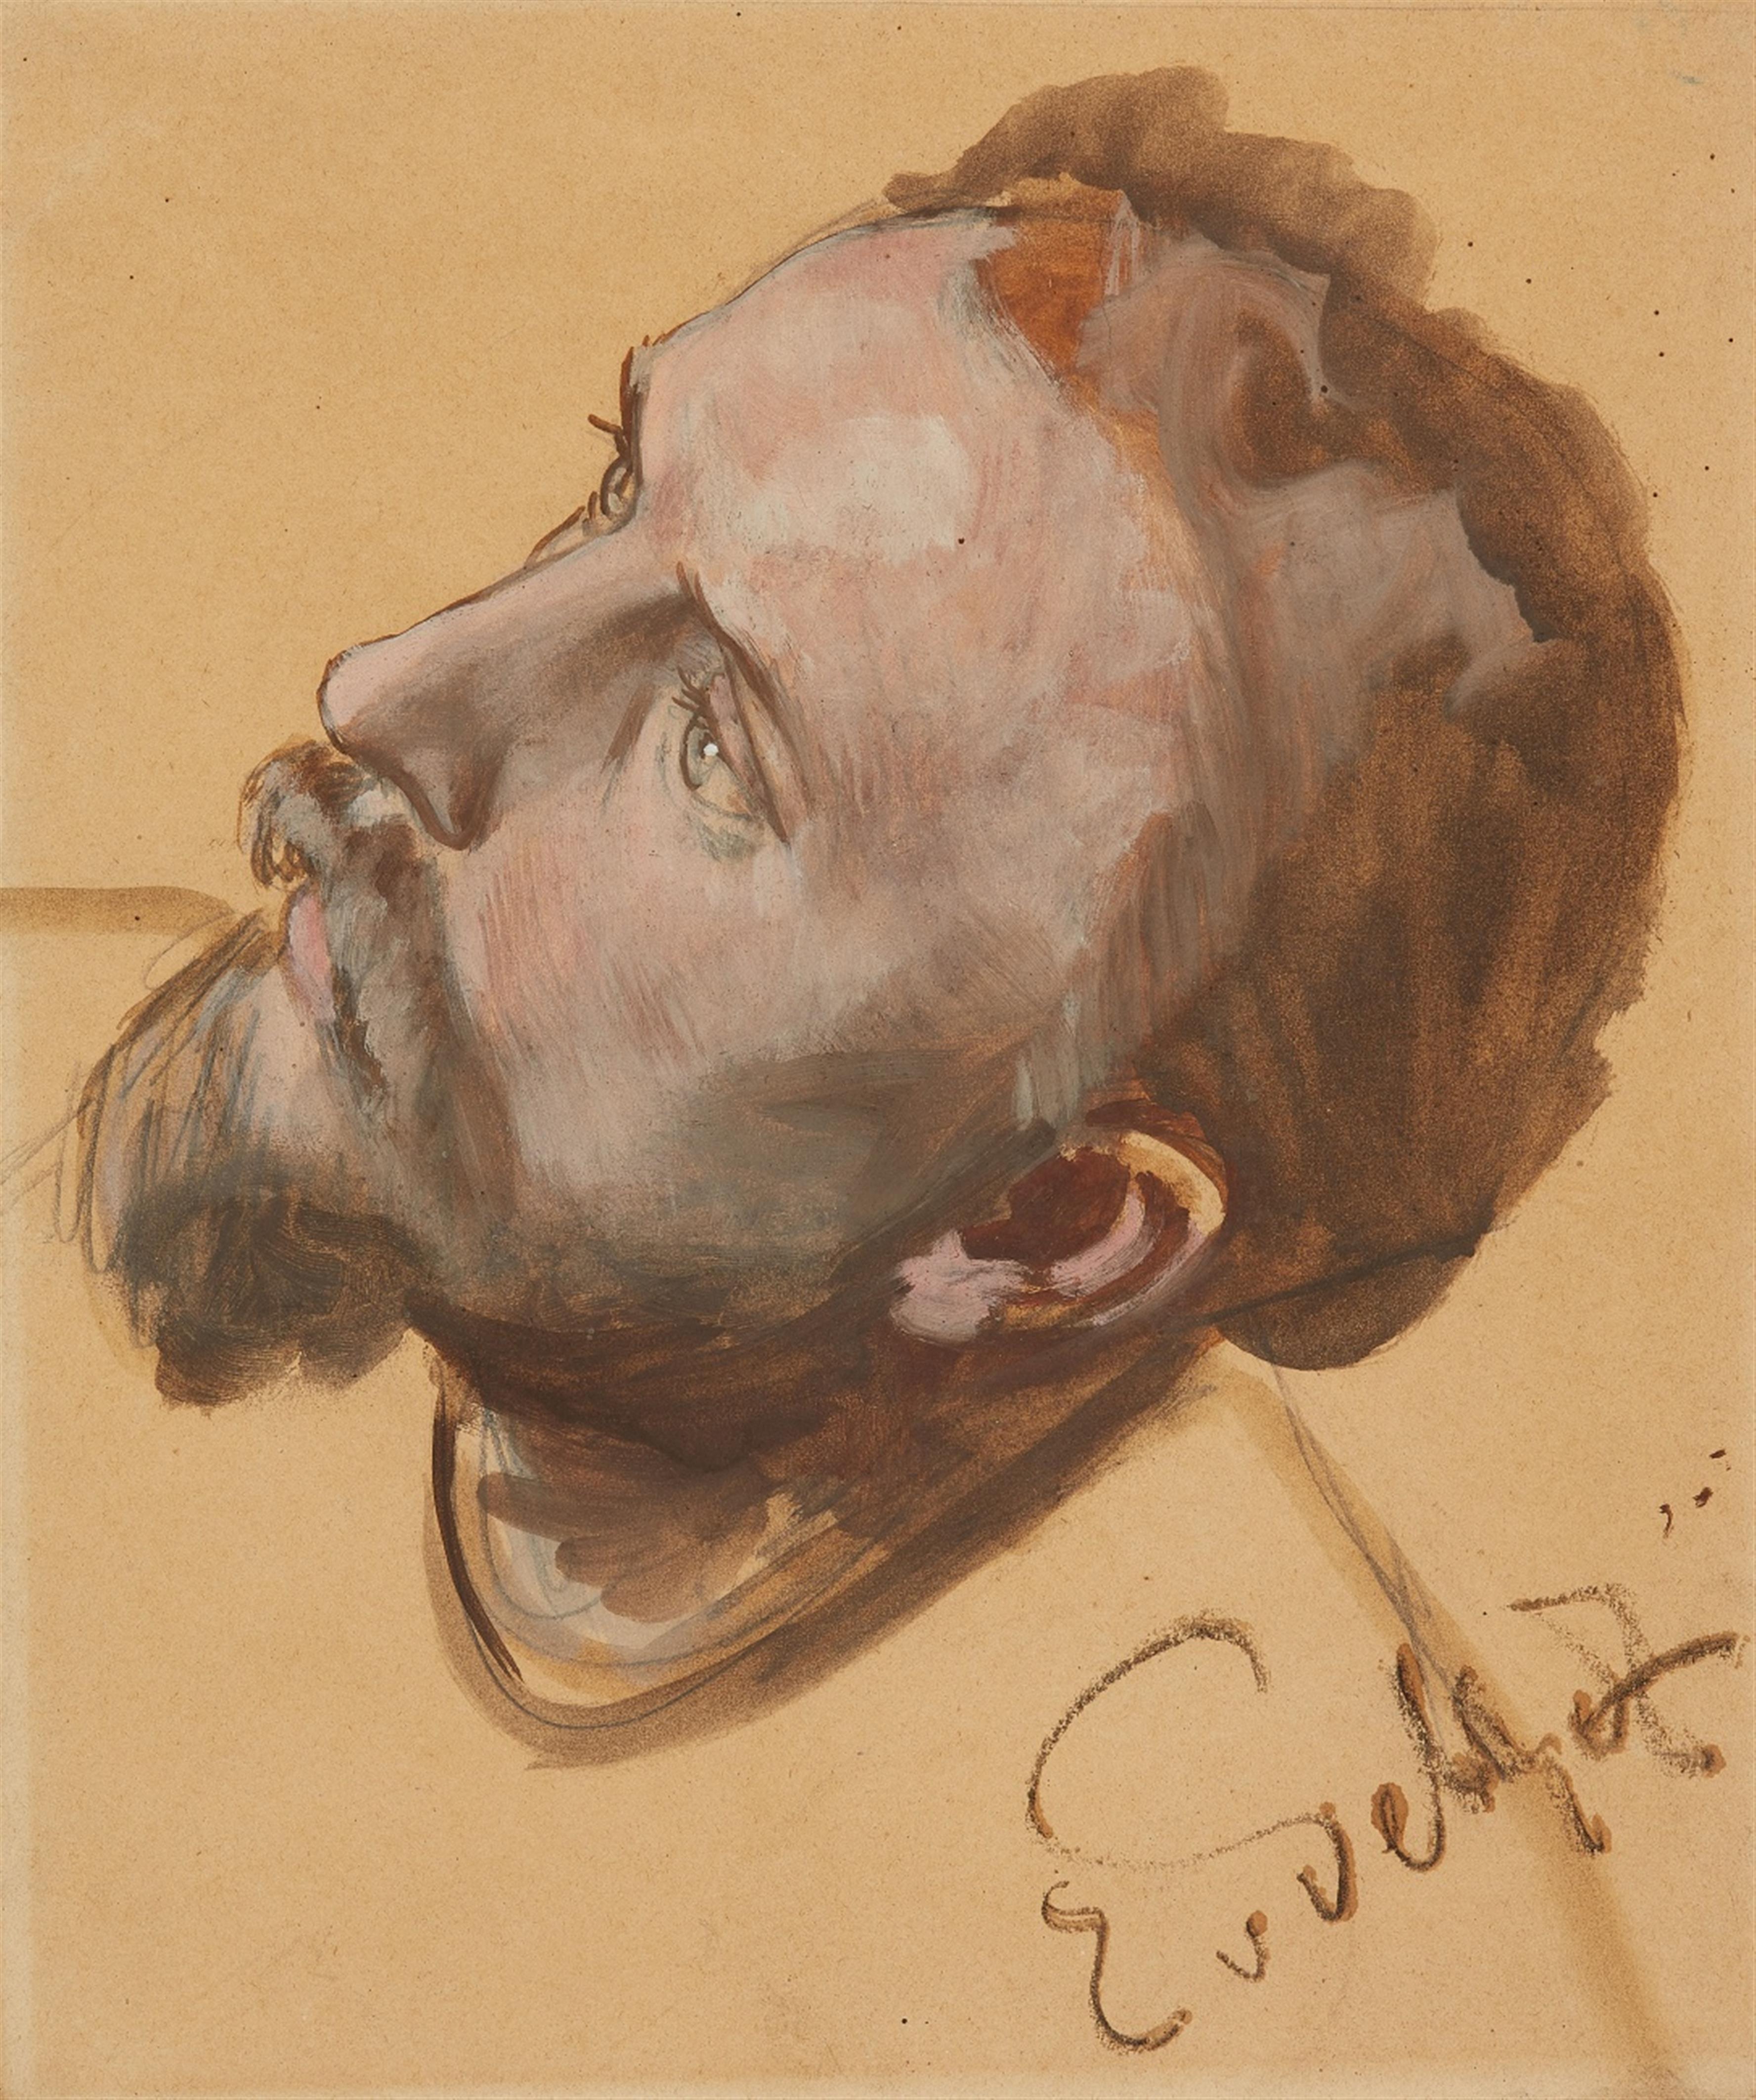 Eduard von Gebhardt - Study of a Man's Head for the Frescoes in Loccum Abbey - image-1